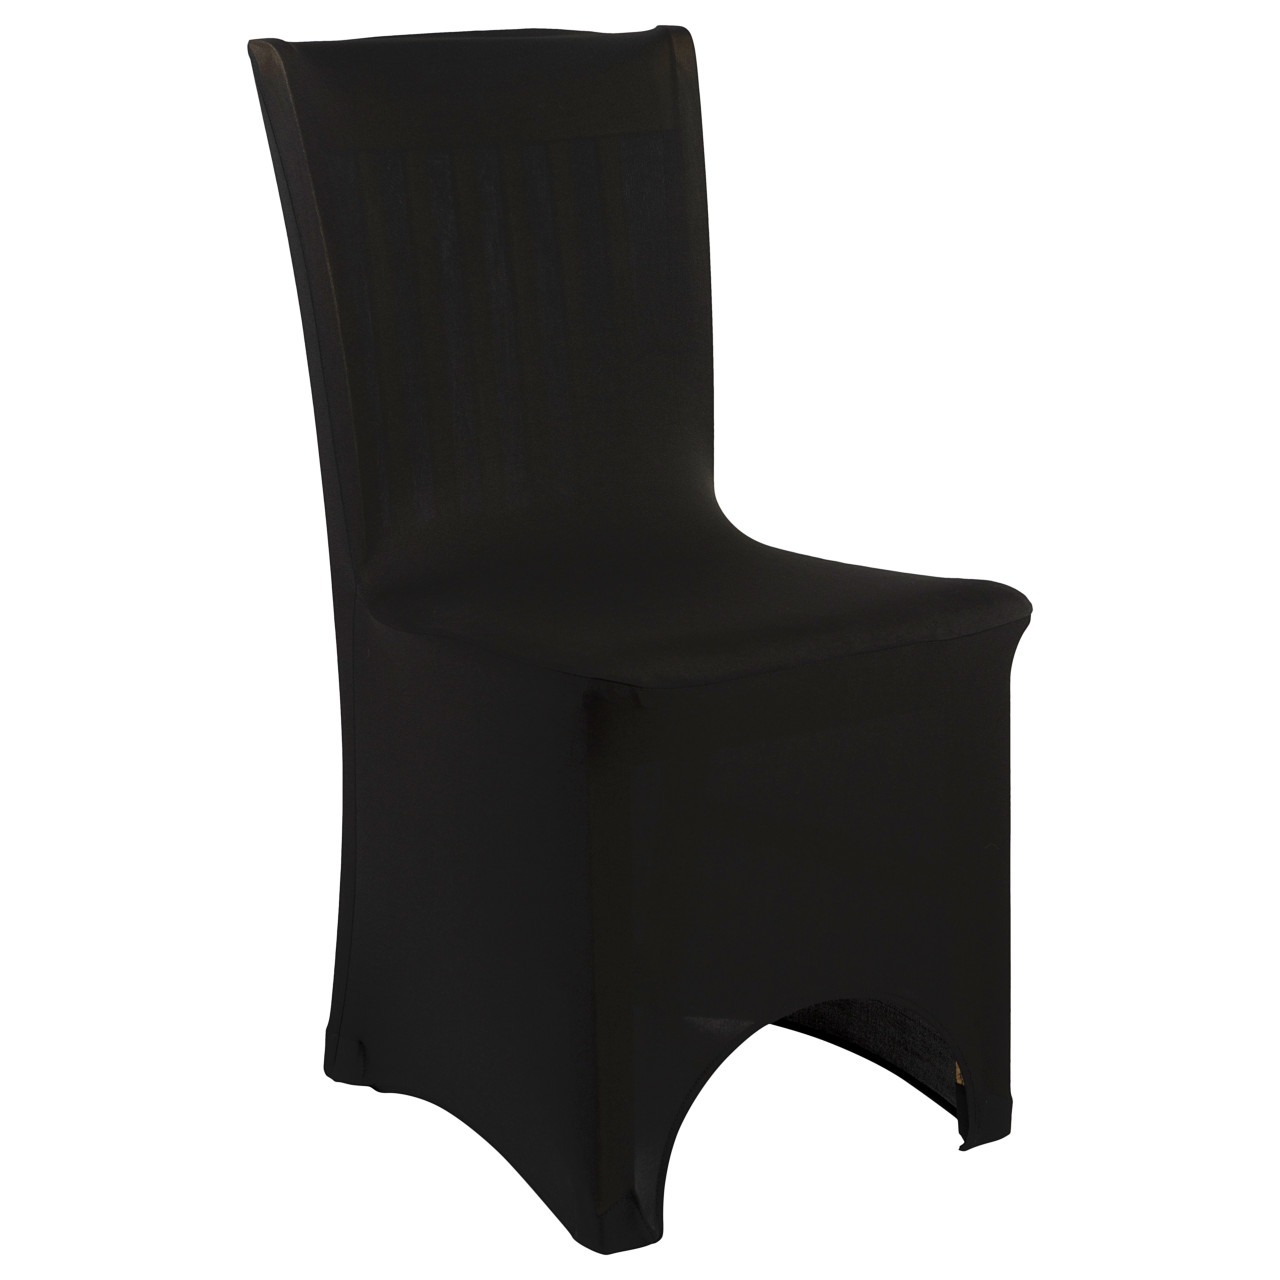 Folding Spandex Chair Cover Chocolate Brown at CV Linens